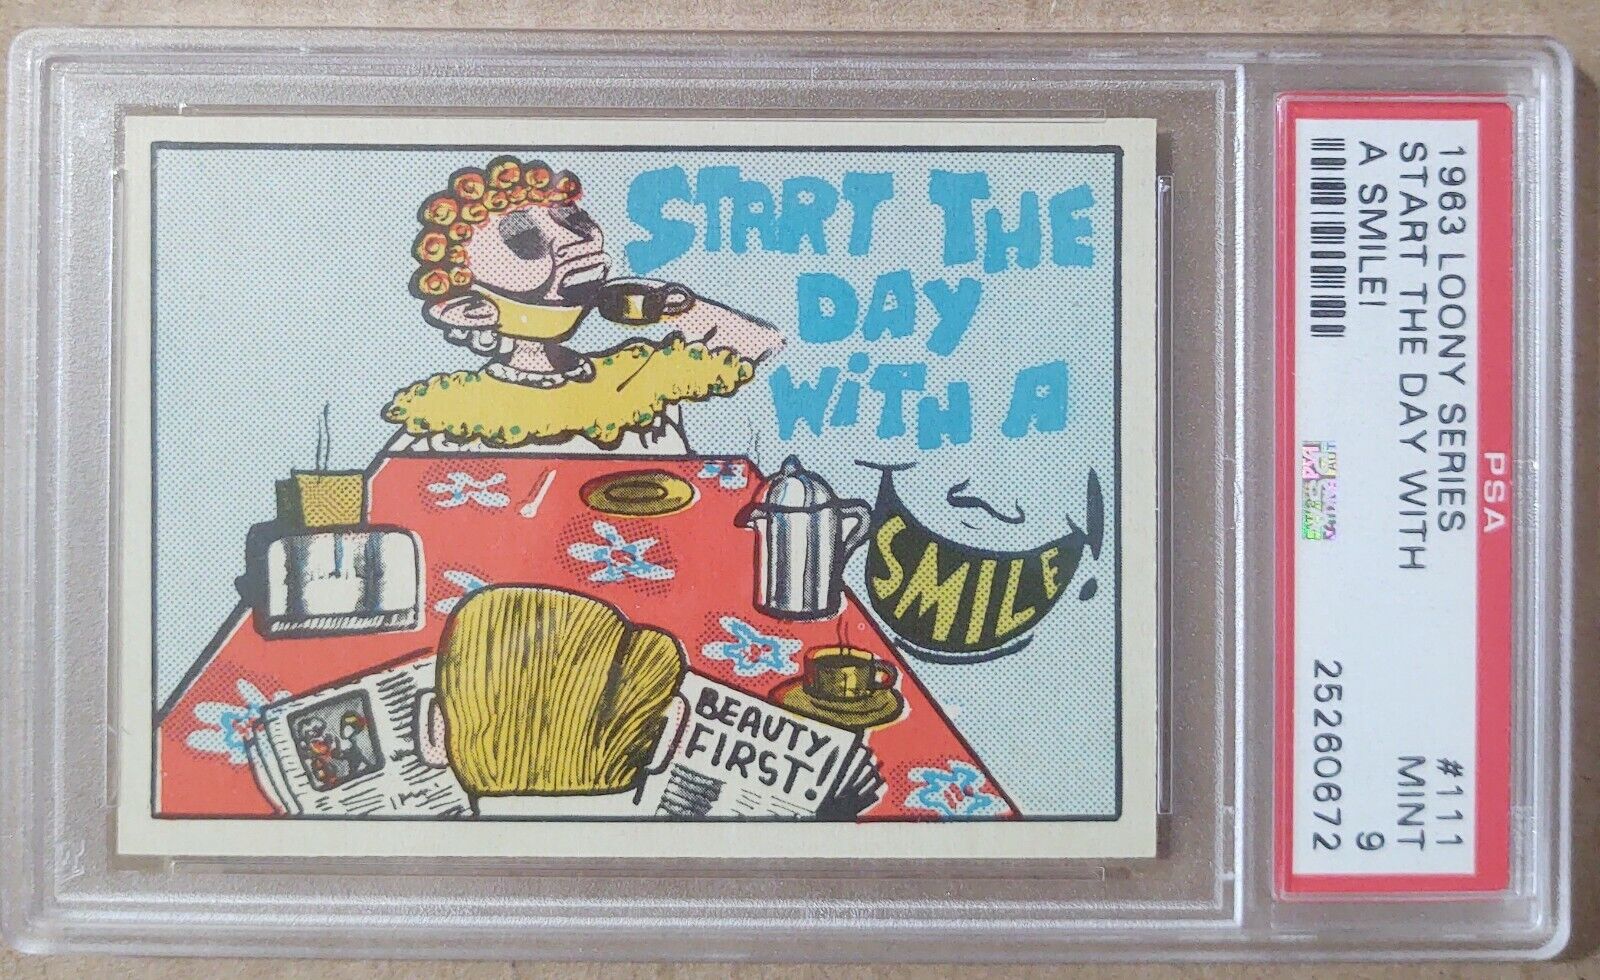 1963 Loony Series #111 Start The Day With a Smile PSA 9 POP 1 Highest Graded